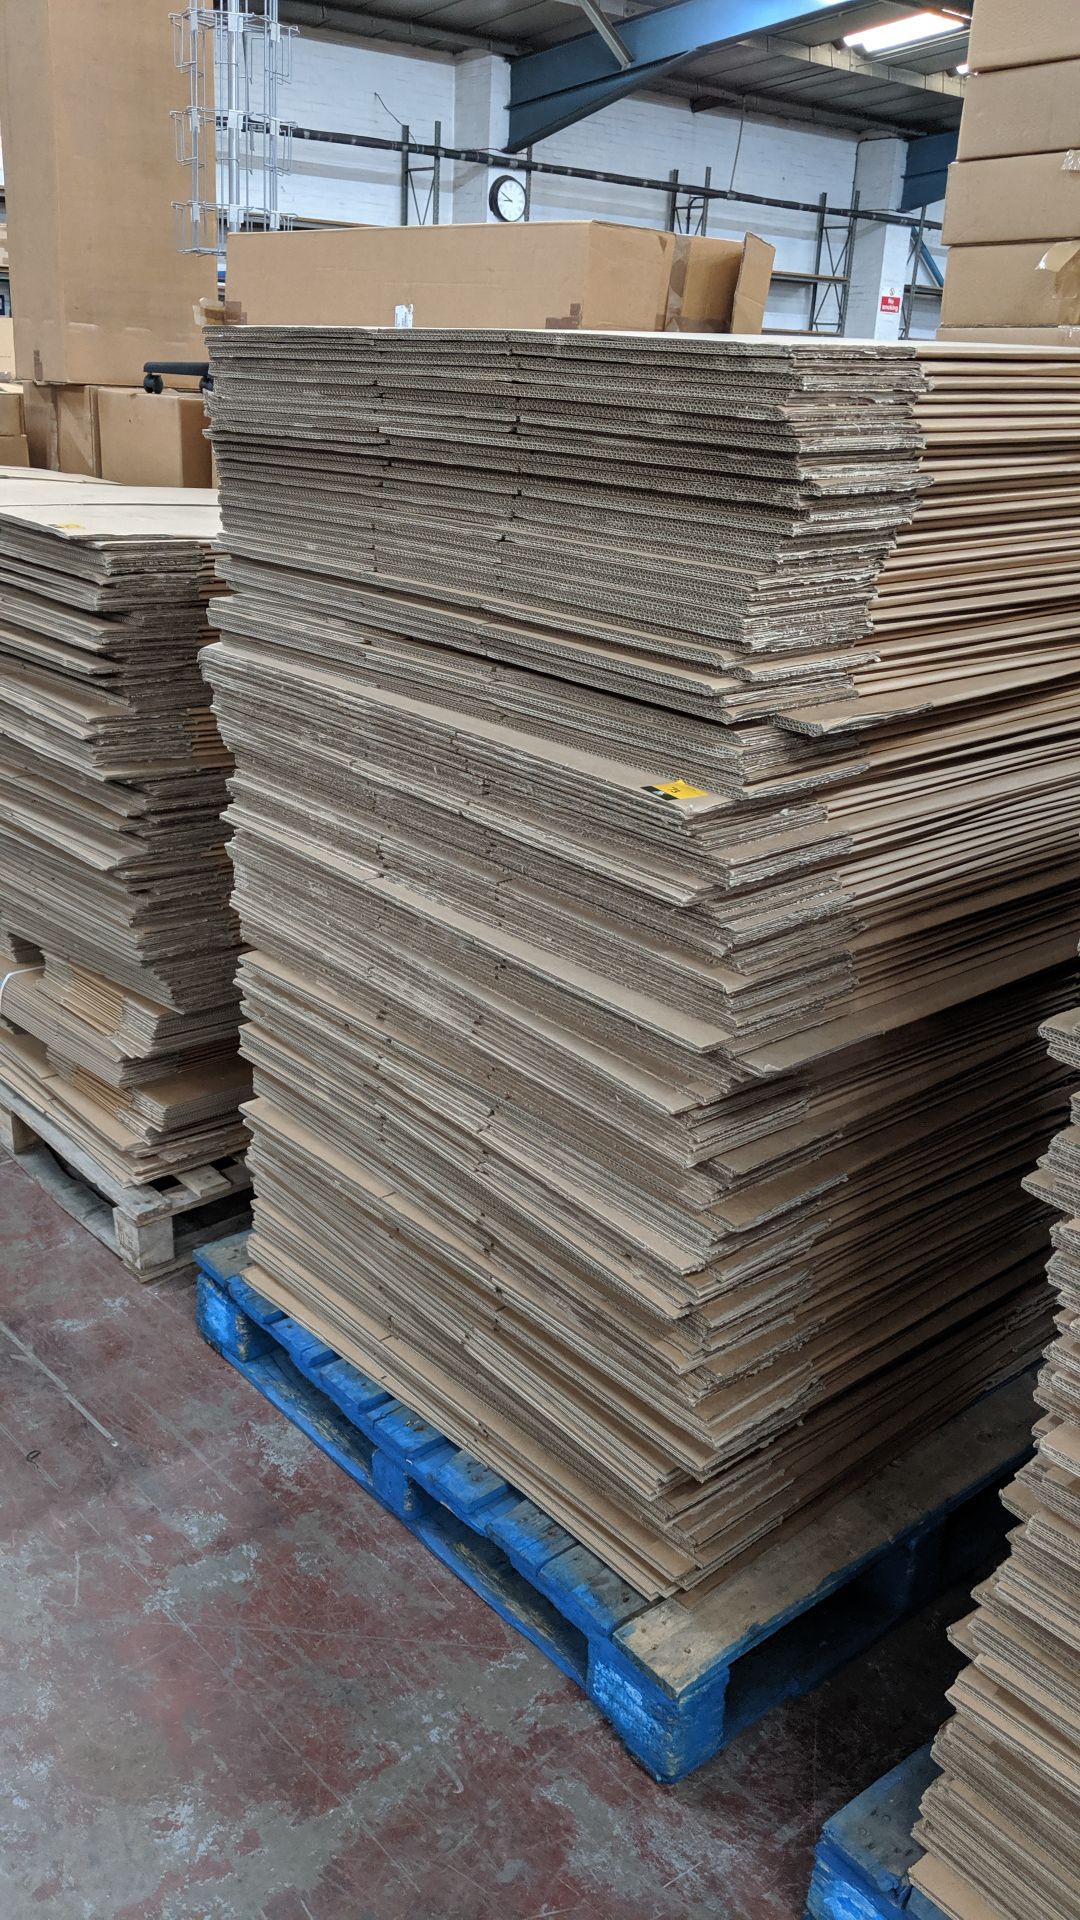 Approx. 100 cardboard boxes, each measuring approx. 620mm x 390mm x 520mm - this lot consists of the